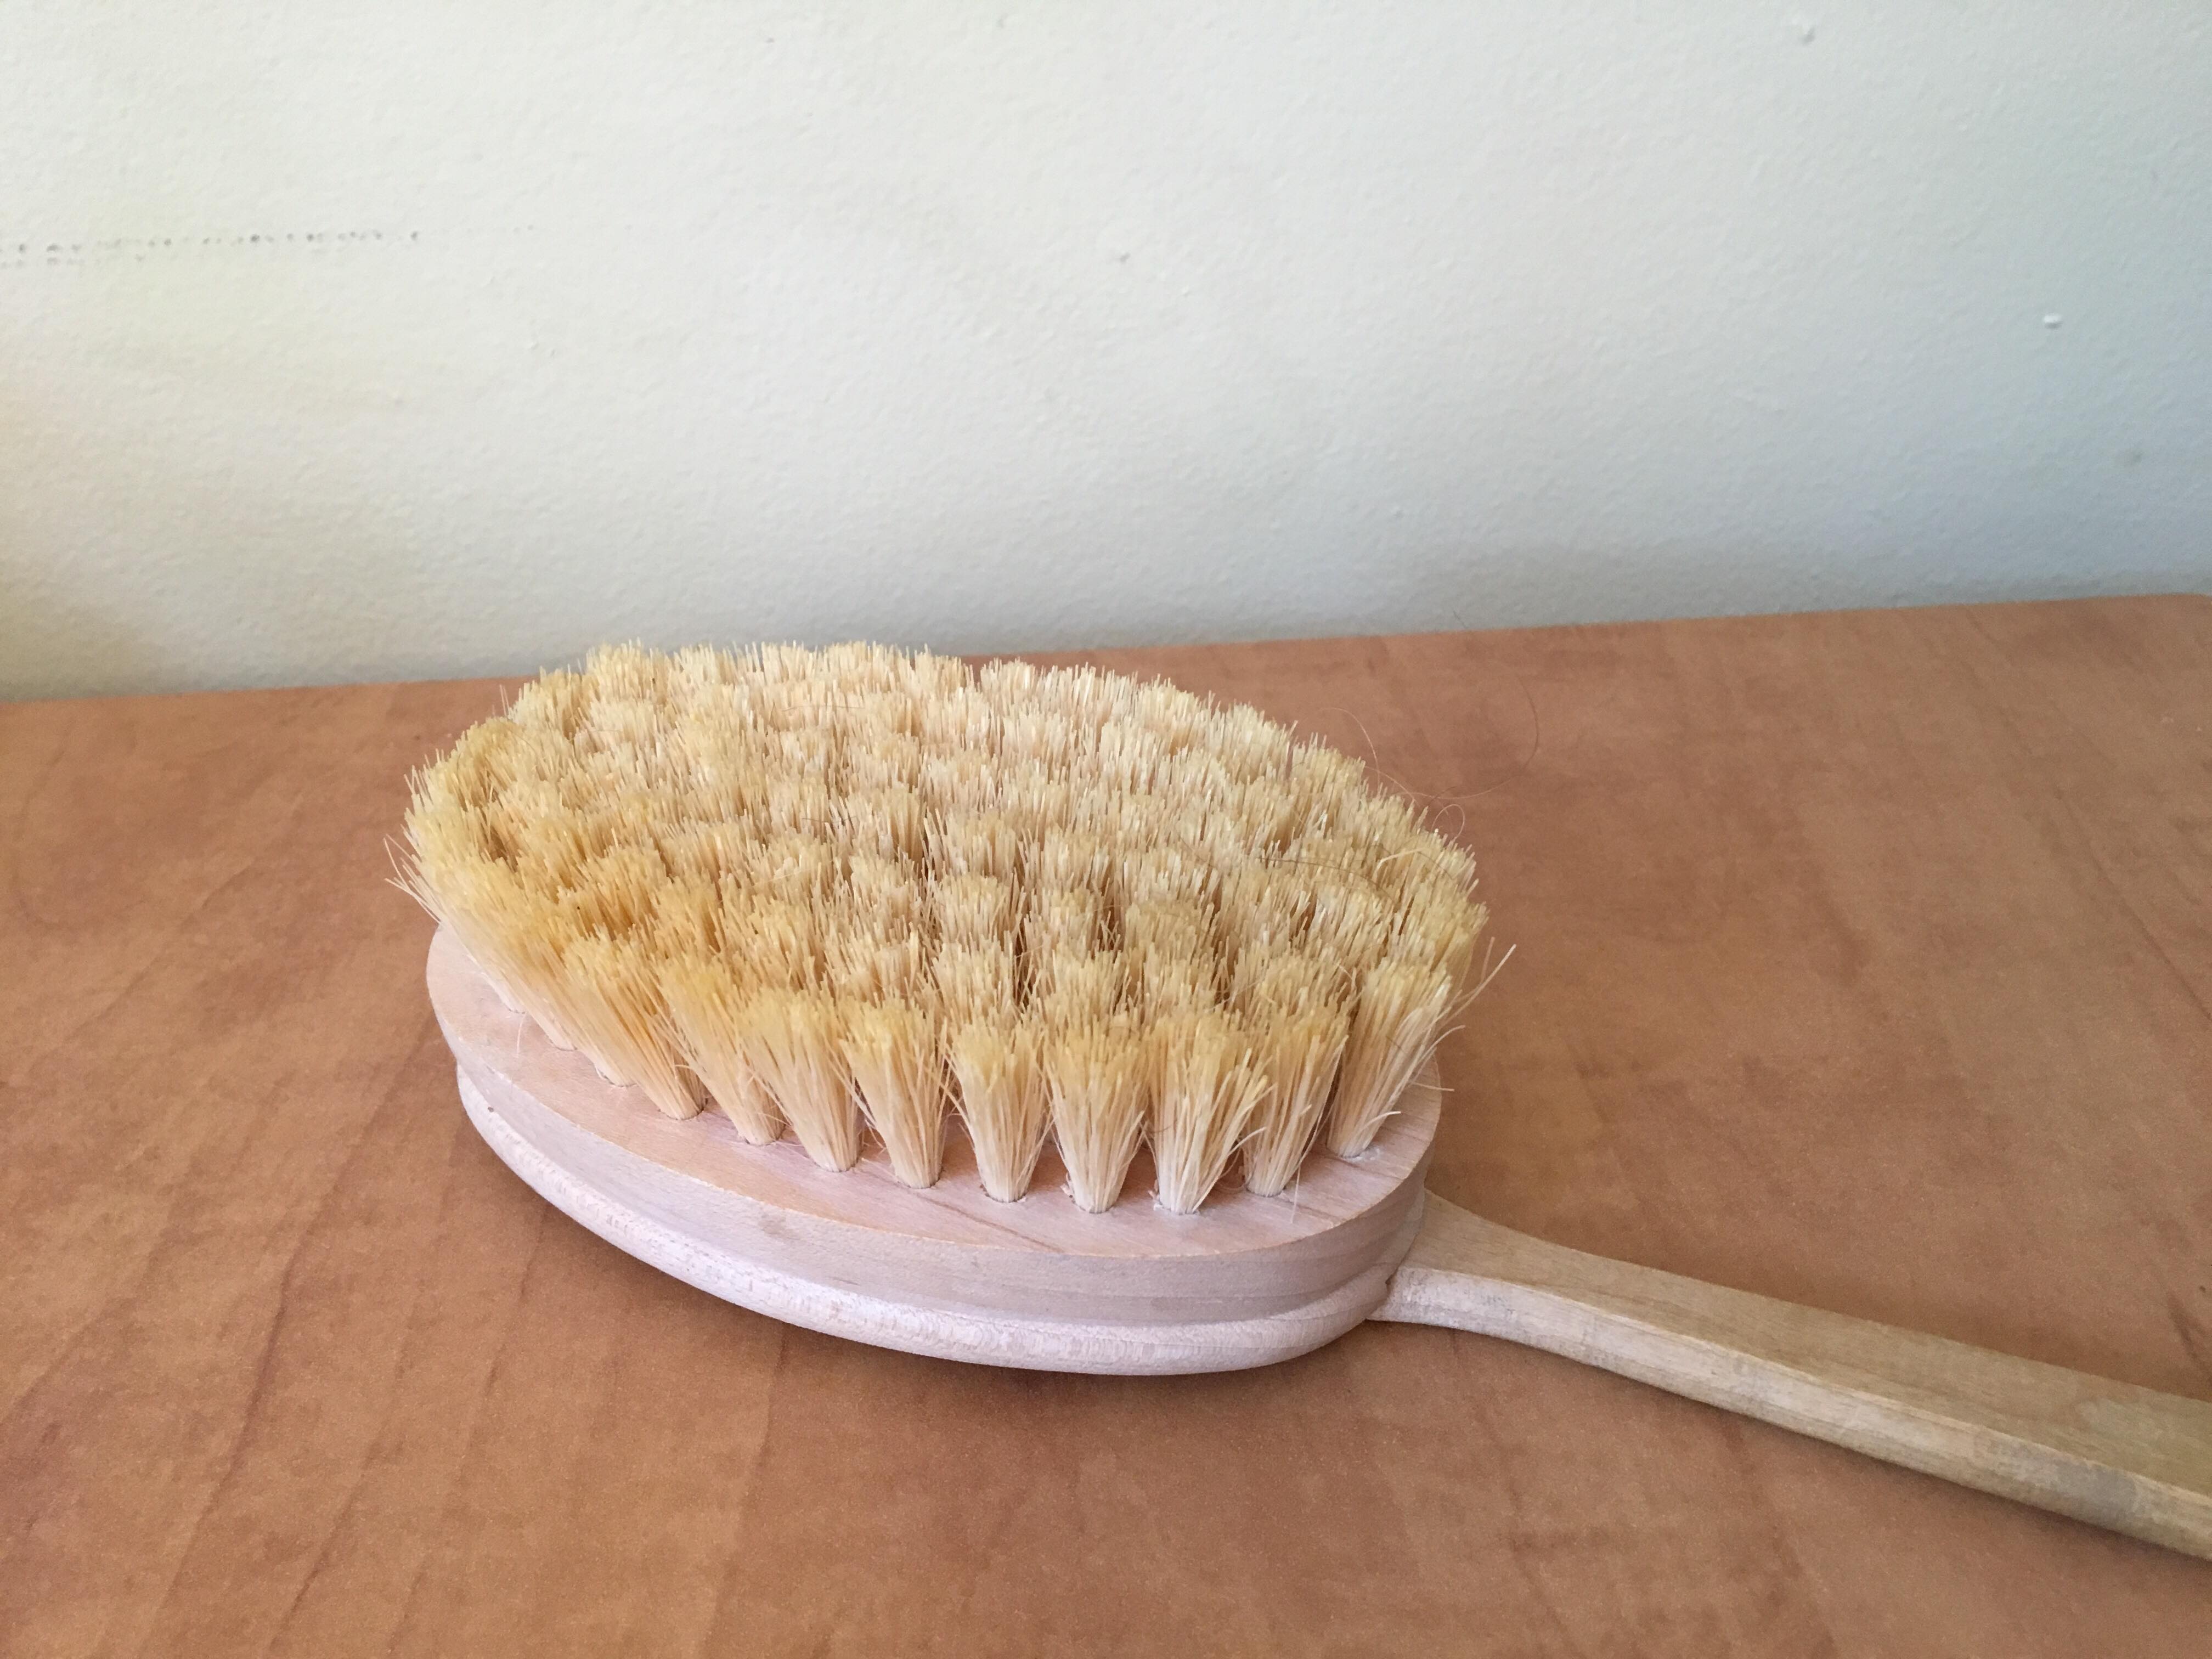 Skin dry brushing is one of the best things to do for a natural detox remedy and to reduce acidity. It removes dead skin cells and dirt that clog the pores so that the body can better elminate toxins 